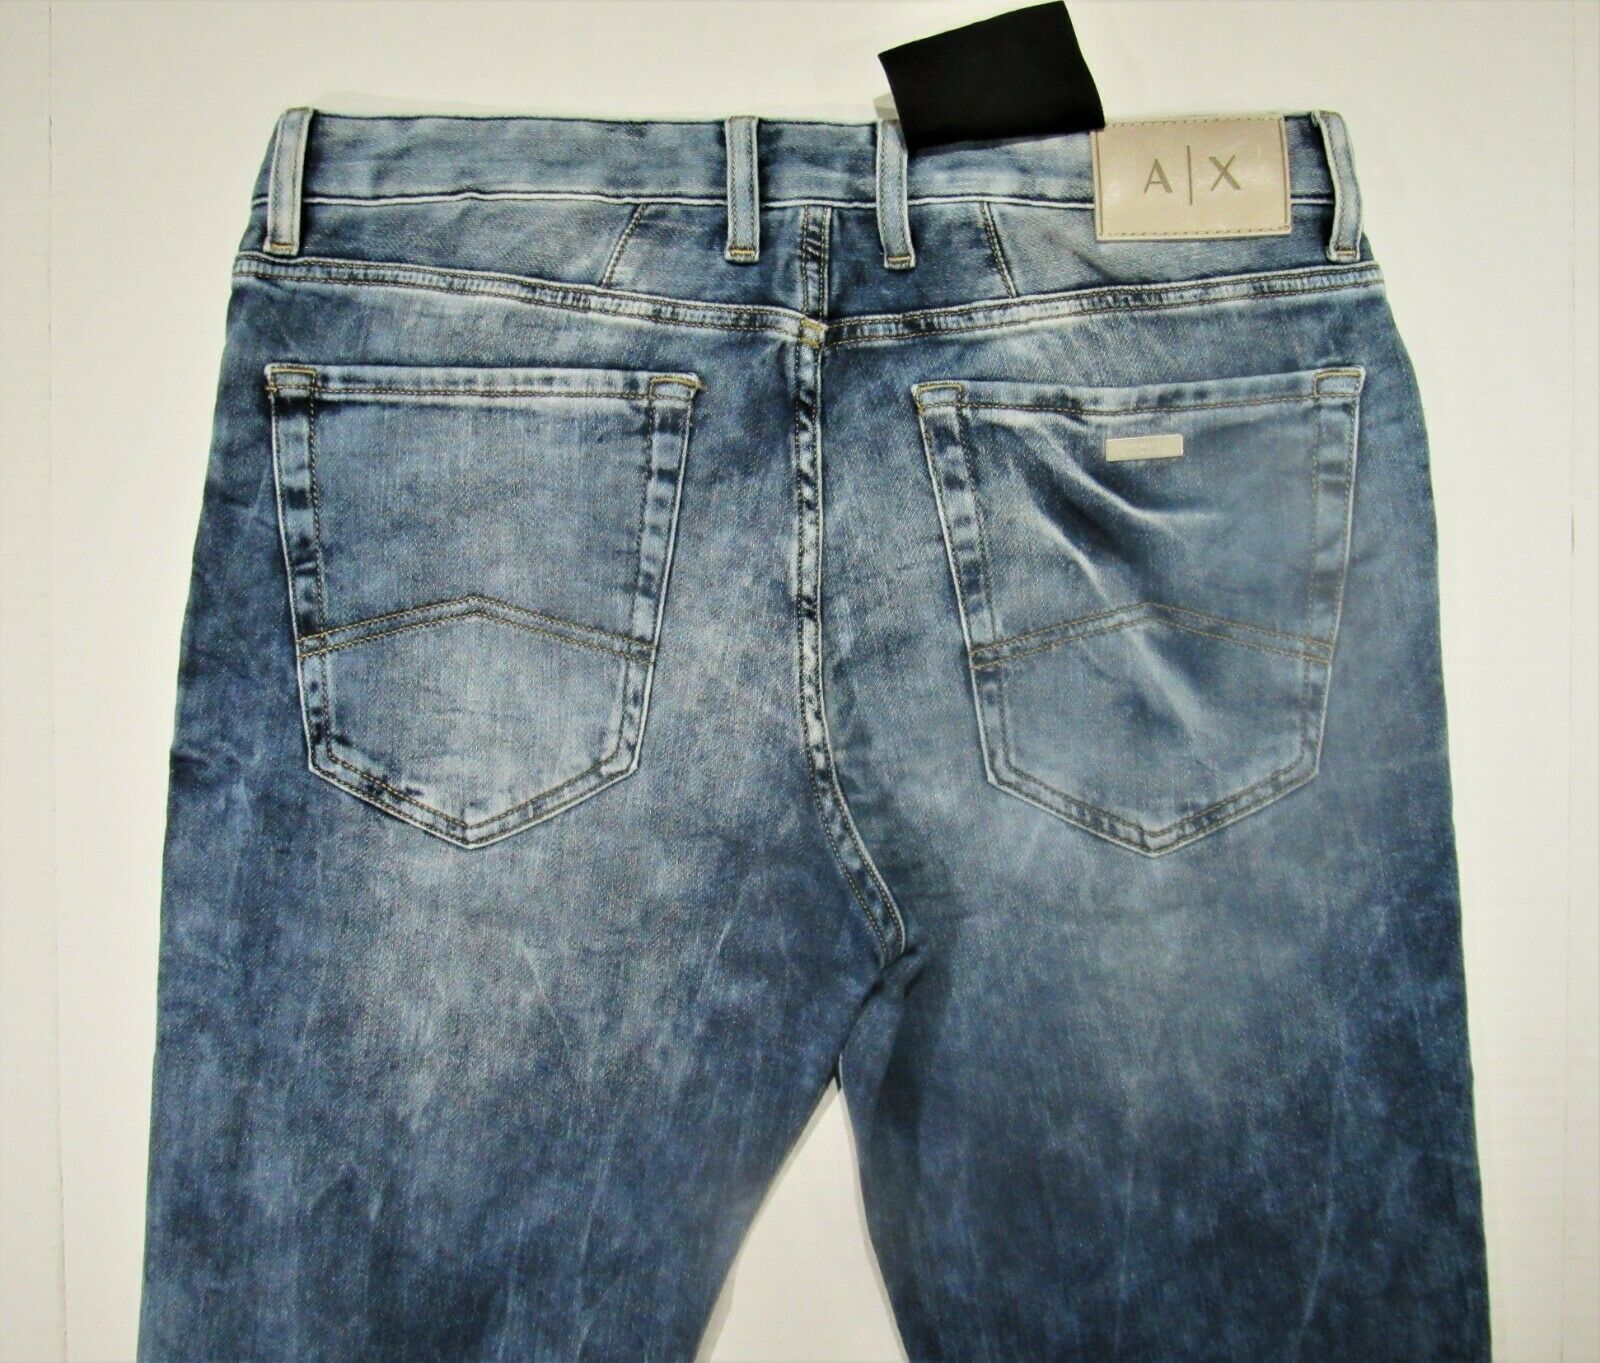 Armani Exchange men's jeans size 32x32 tapered skinny stretch - Jeans